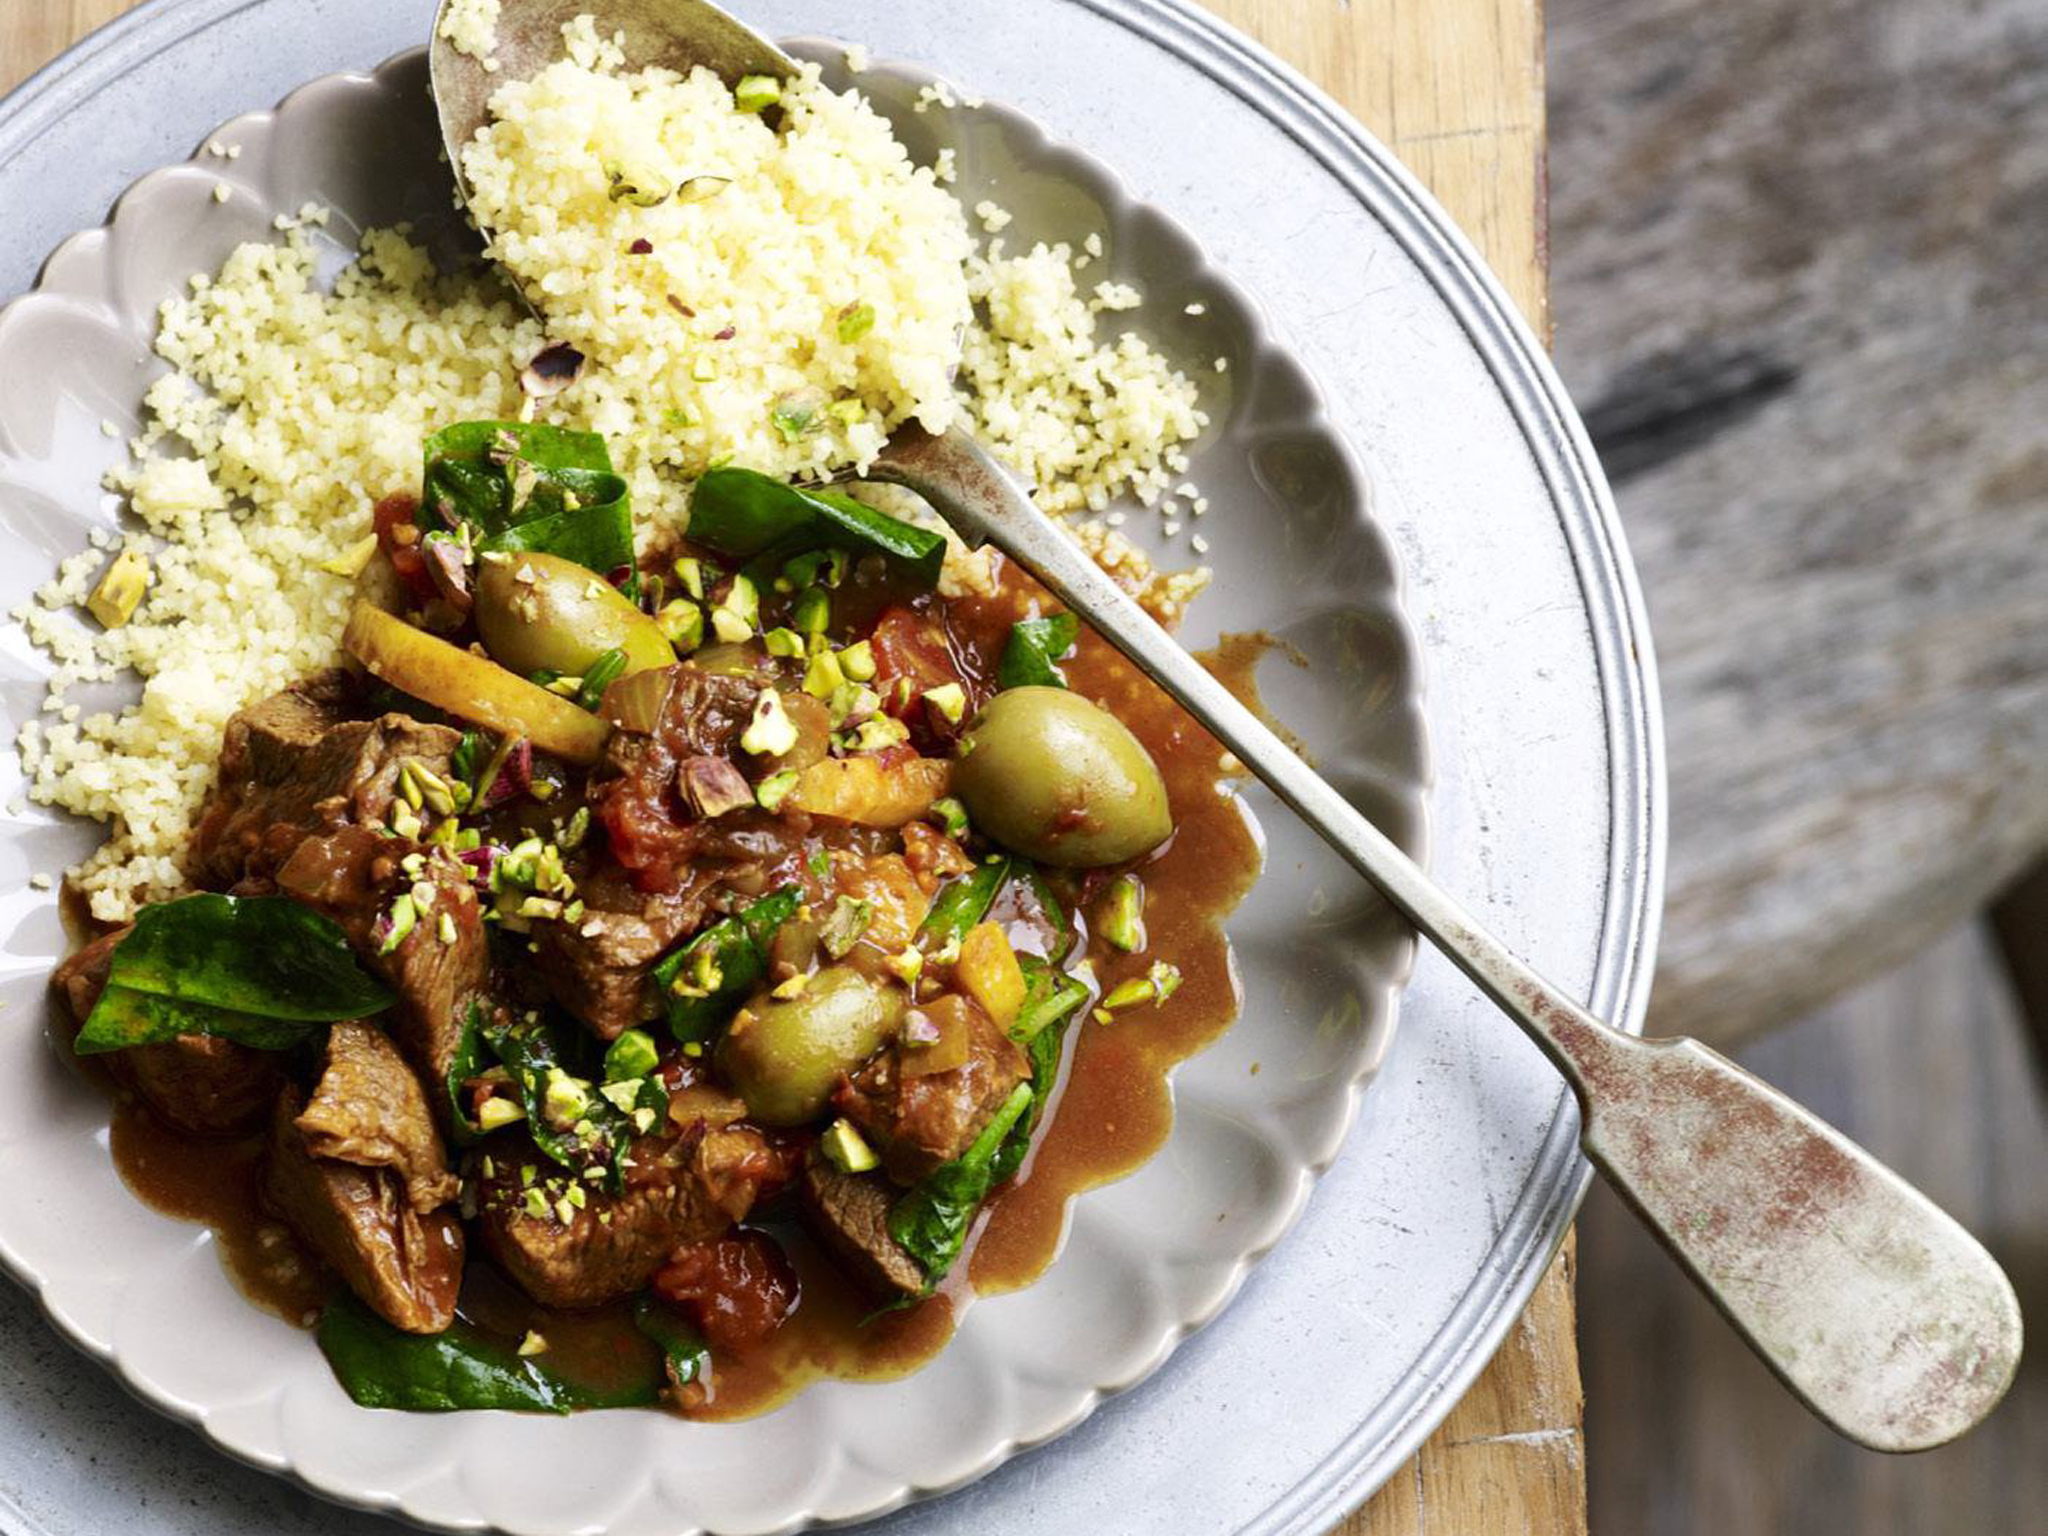 BEEF TAGINE WITH SPINACH AND OLIVES